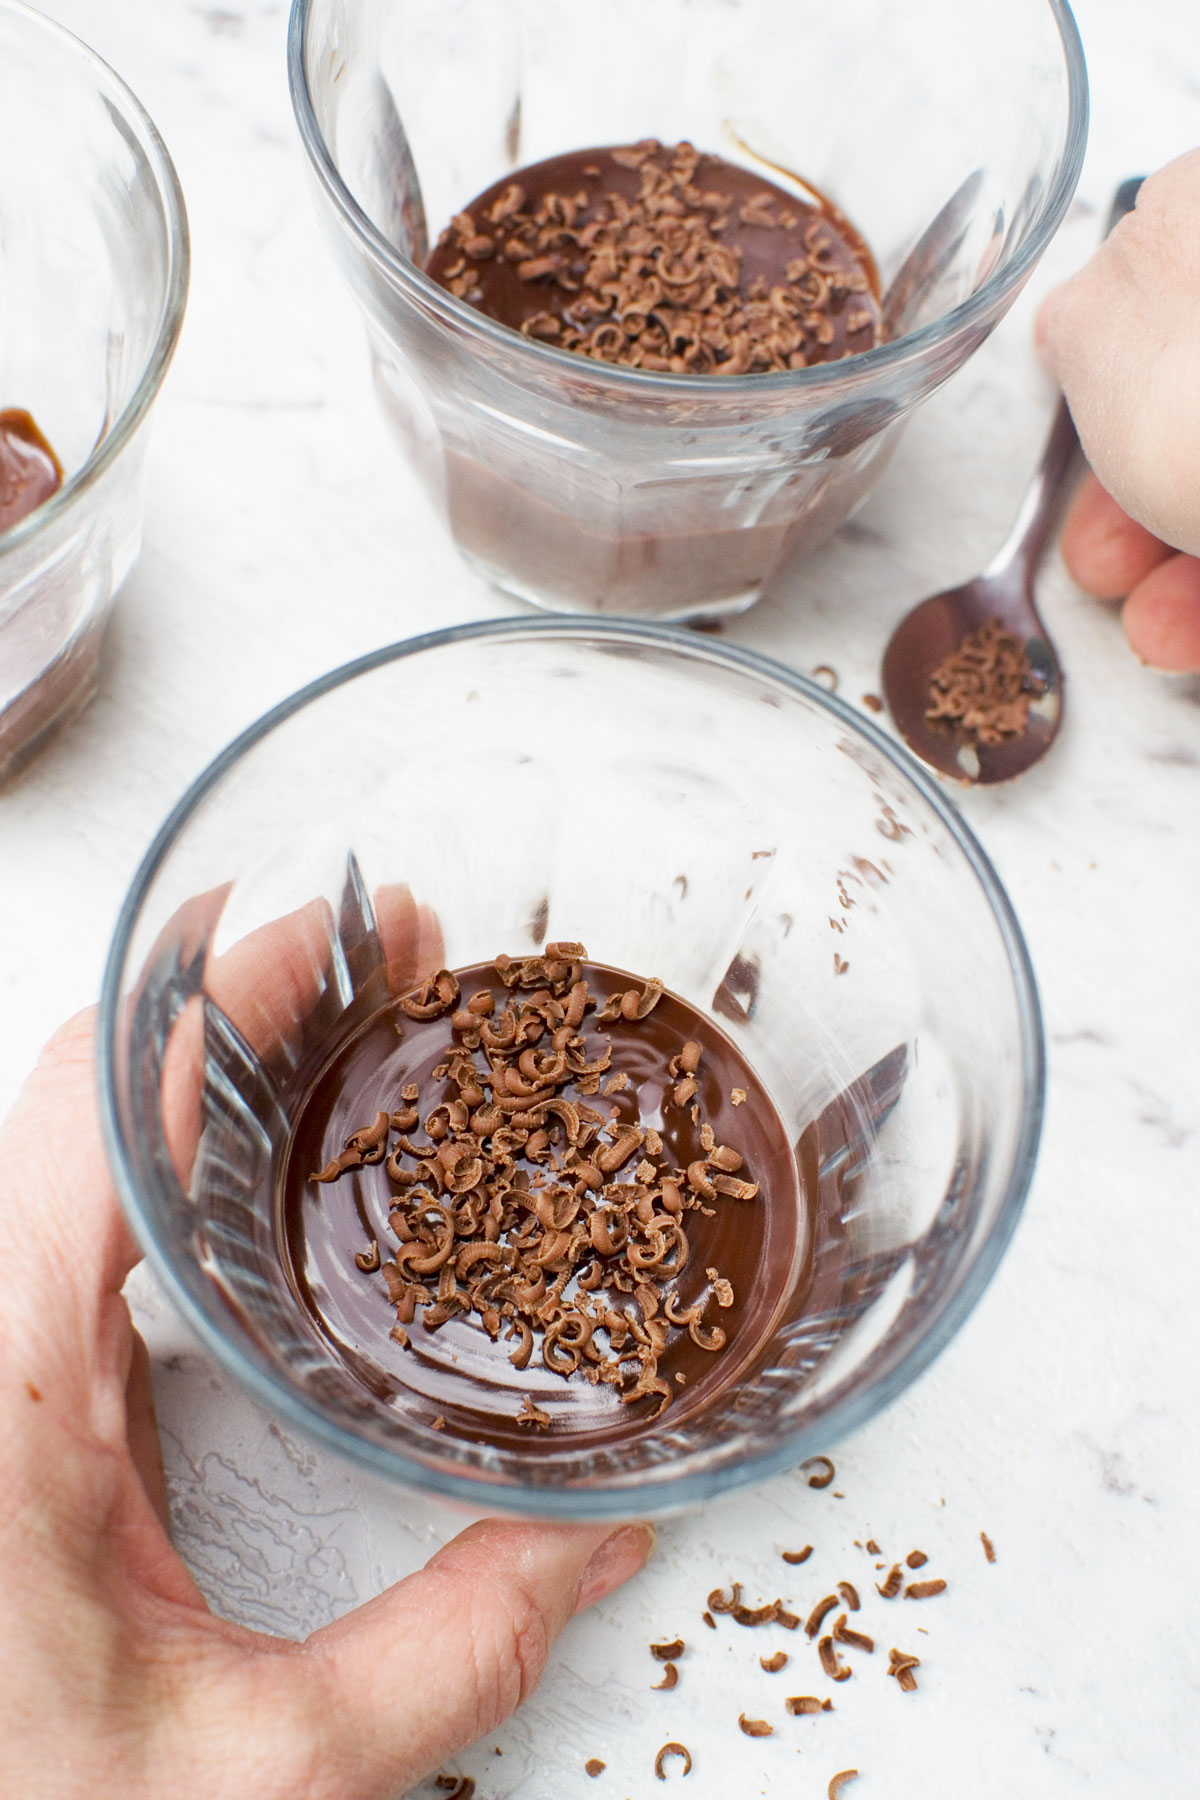 <p>You’re only 5 minutes and 4 ingredients away from a ridiculously easy no-bake chocolate dessert that impresses you every time. Chocolate pots are rich and smooth, and a perfect make-ahead dessert for dinner parties!</p> <p><strong>Go to the recipe</strong>: <strong><a href="https://scrummylane.com/5-minute-chocolate-pots-only-4-ingredients/">5-Minute Chocolate Pots</a></strong></p>